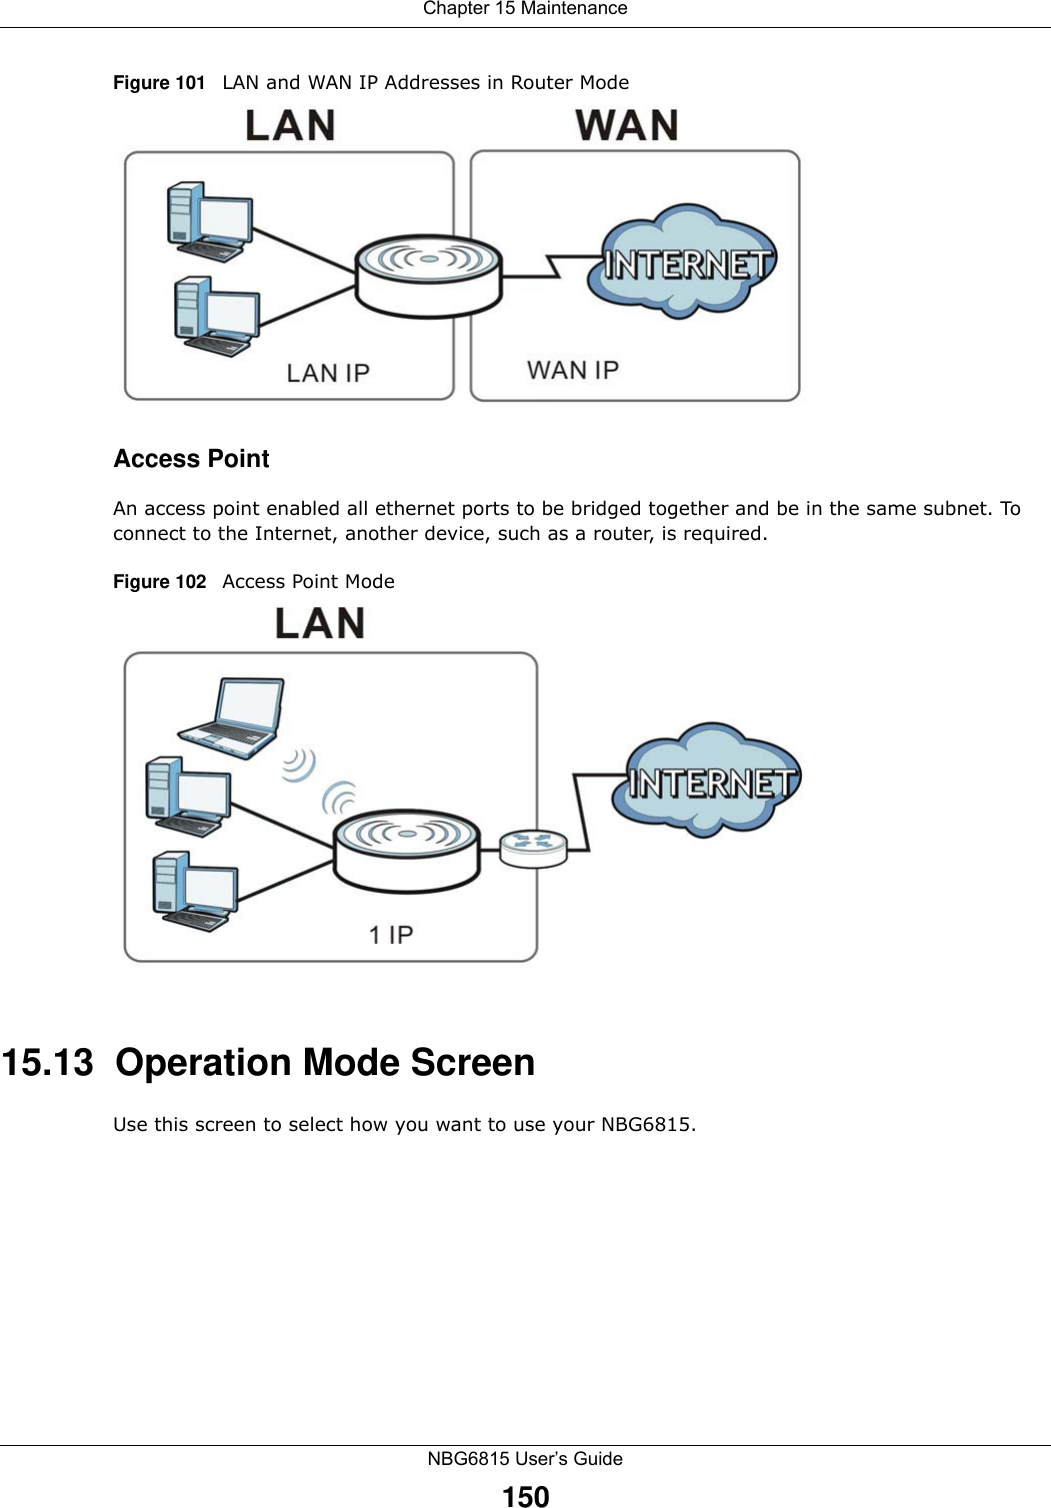 Chapter 15 MaintenanceNBG6815 User’s Guide150Figure 101   LAN and WAN IP Addresses in Router ModeAccess PointAn access point enabled all ethernet ports to be bridged together and be in the same subnet. To connect to the Internet, another device, such as a router, is required.Figure 102   Access Point Mode15.13  Operation Mode ScreenUse this screen to select how you want to use your NBG6815. 